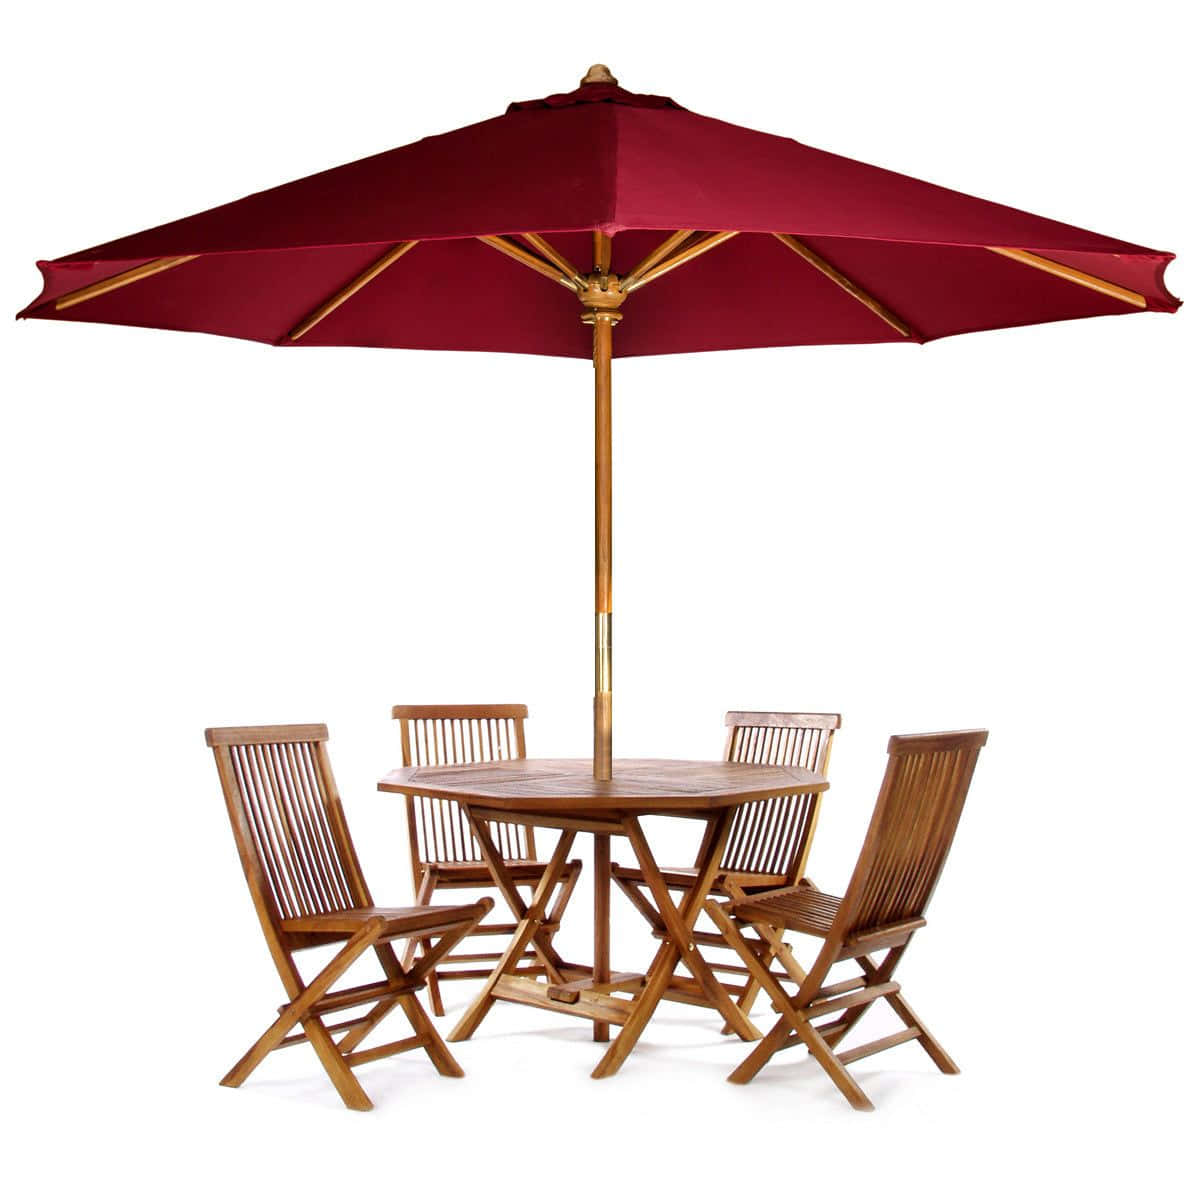 A Table With Chairs And An Umbrella